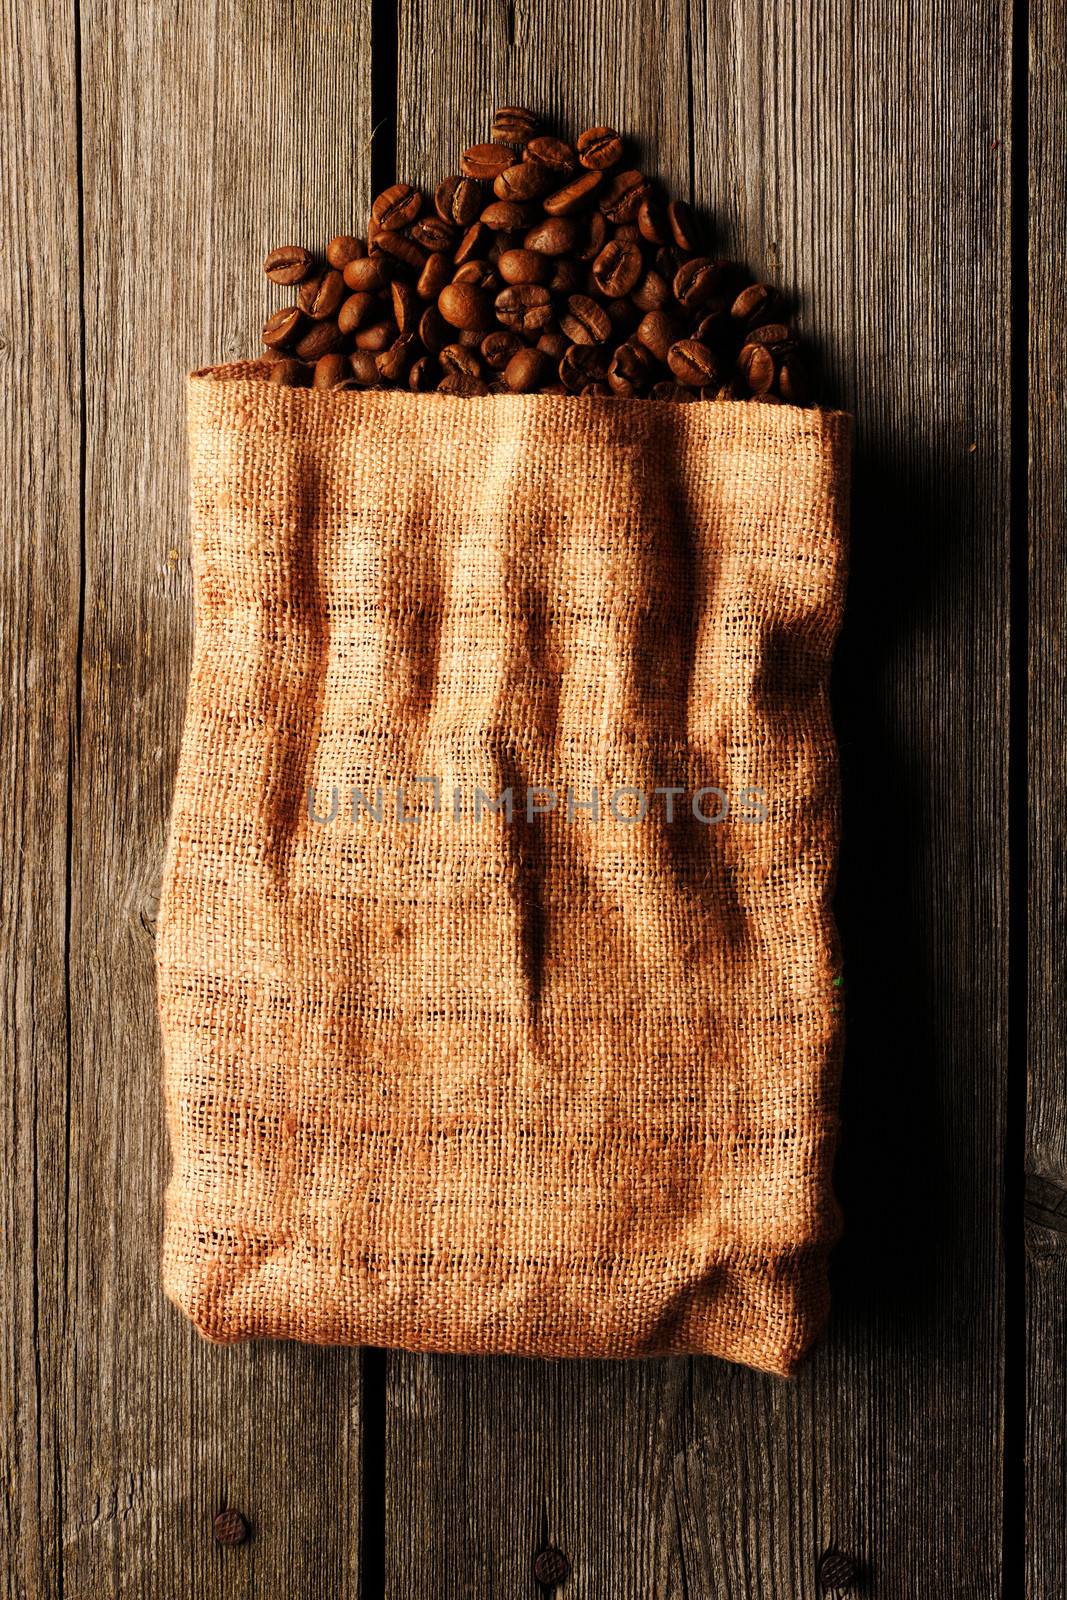 Coffee beans in bag background by haveseen